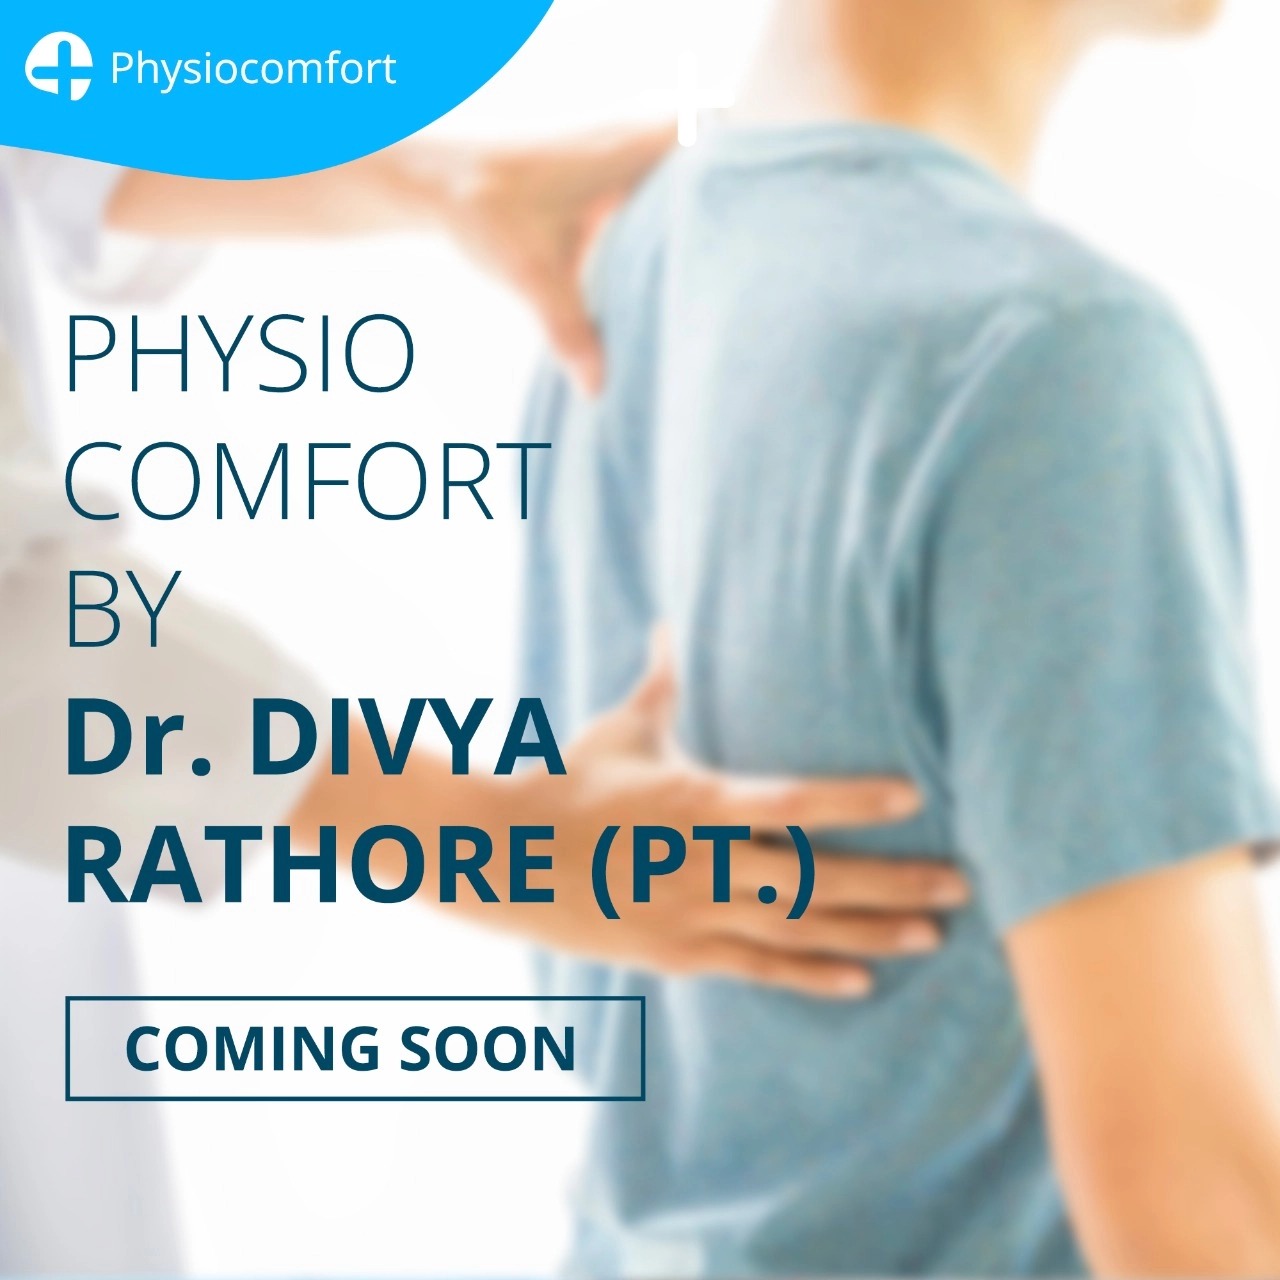 PhysioComfort Physiotherapy